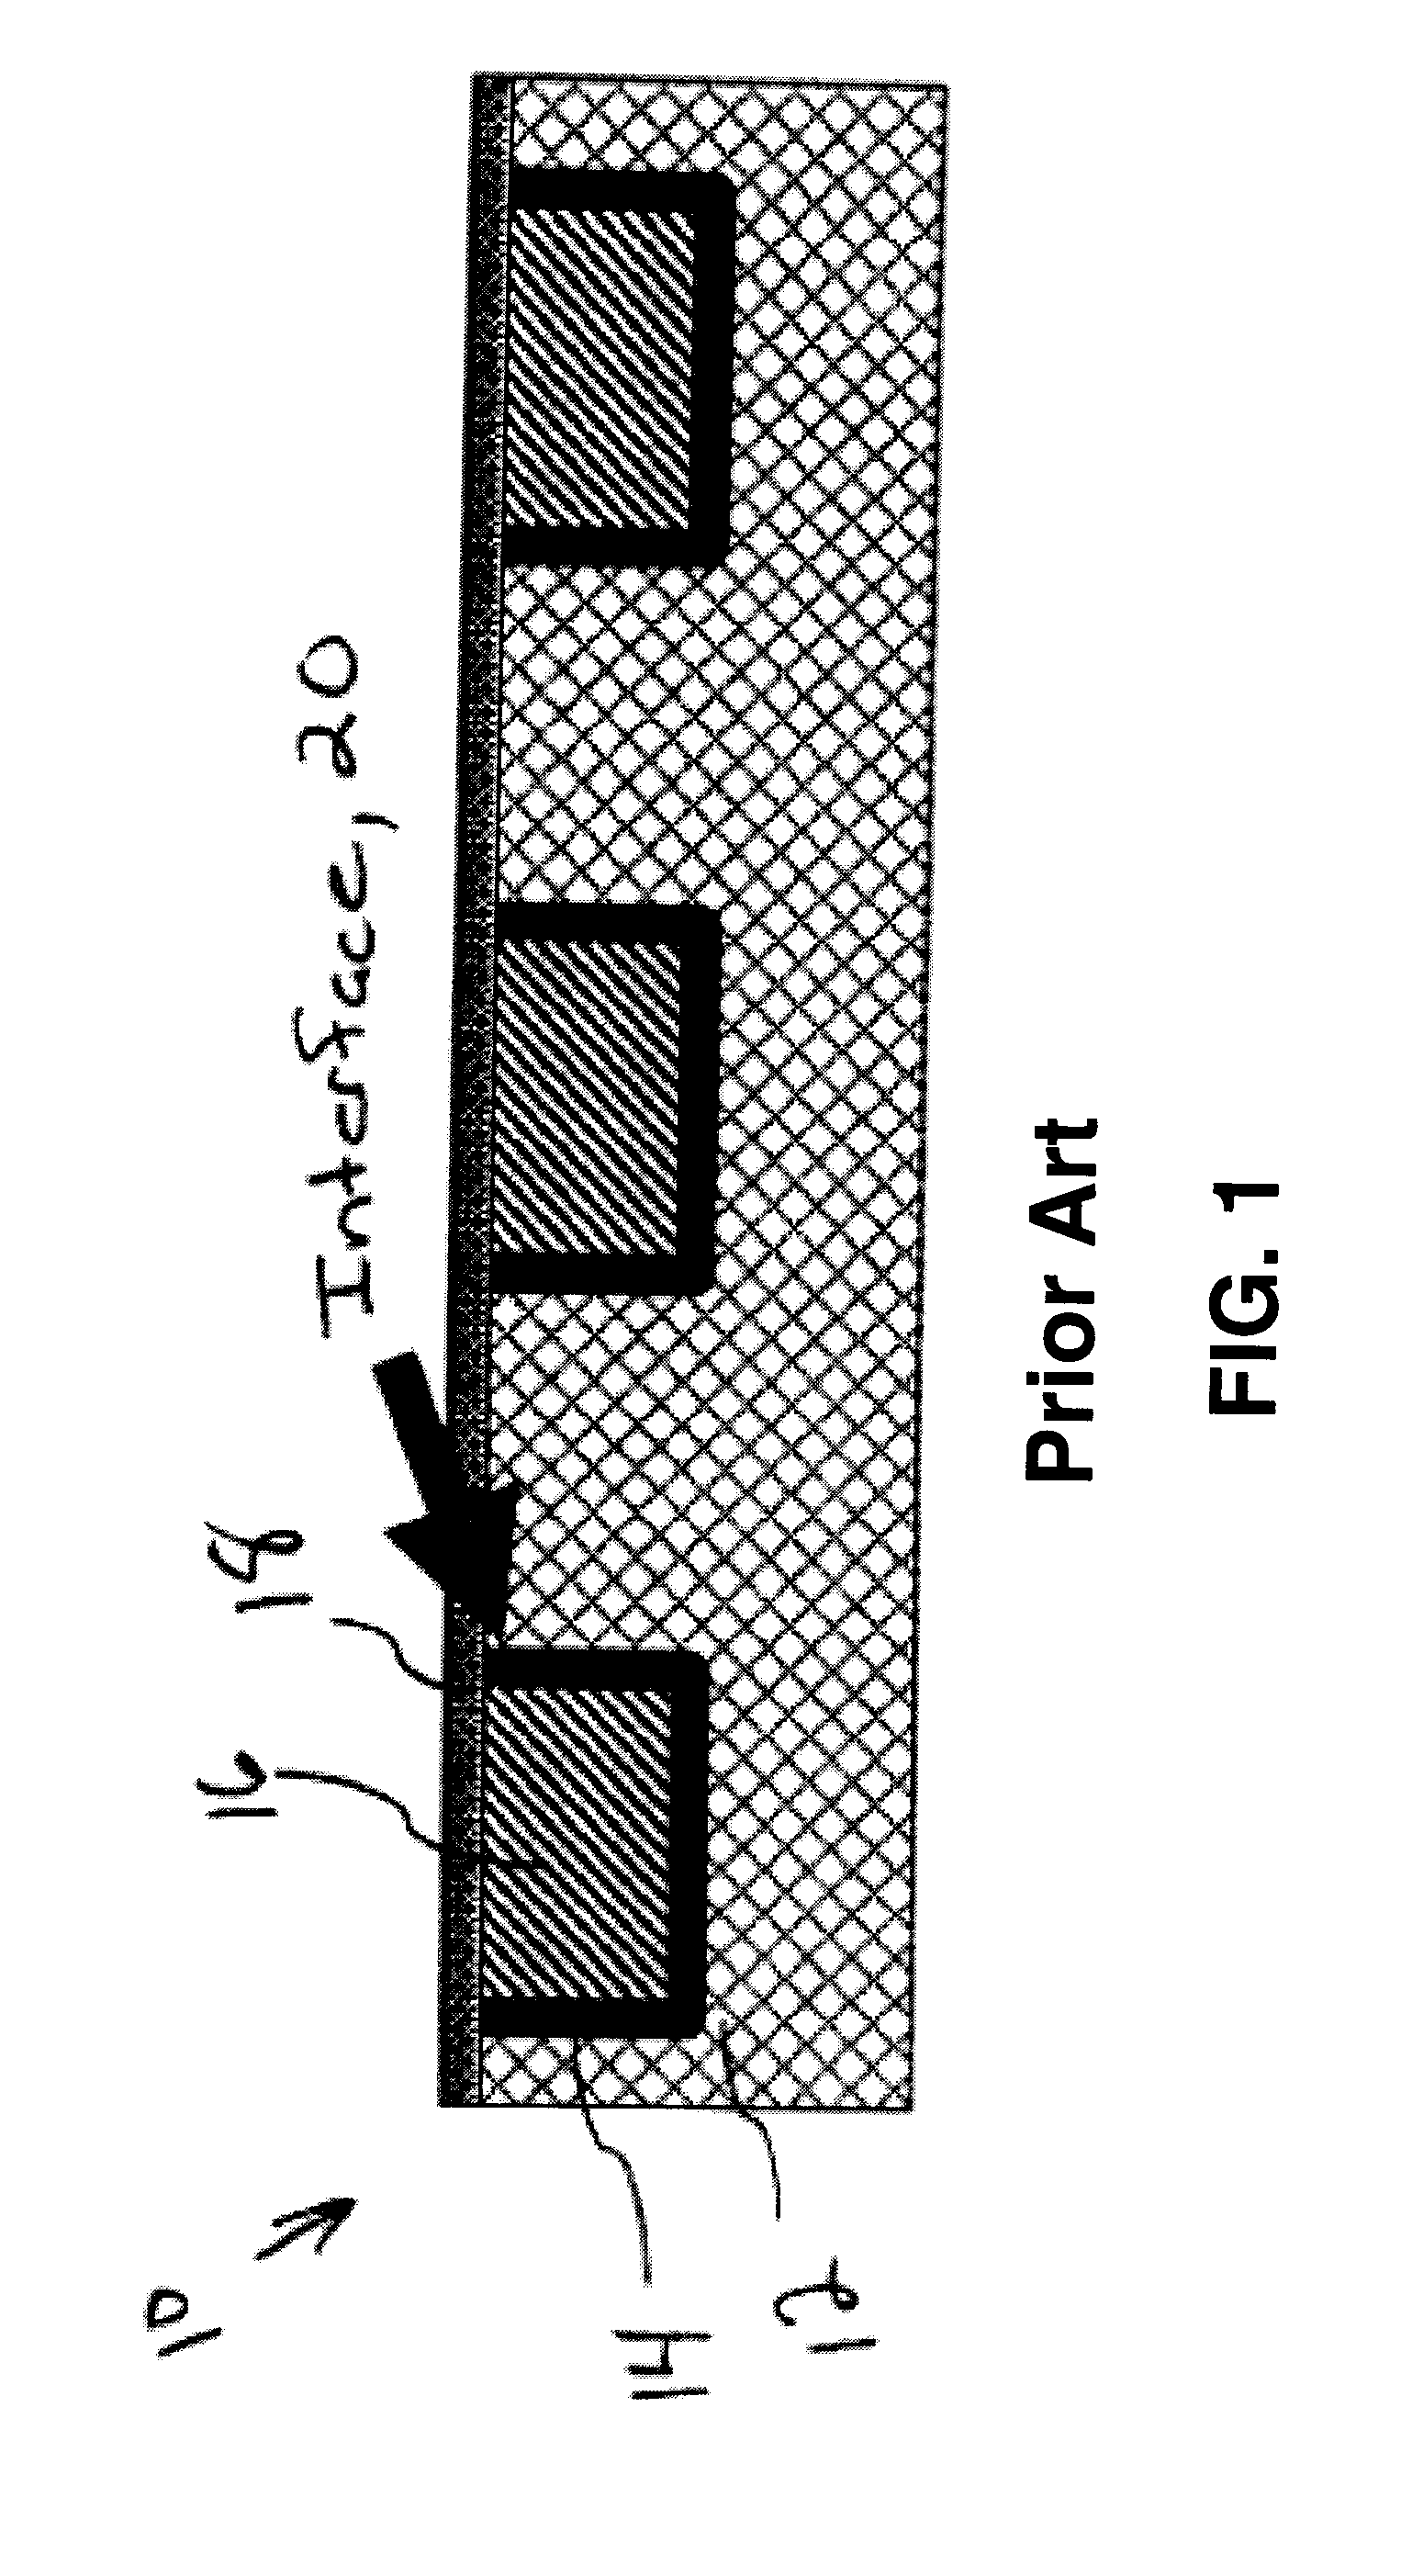 Reduced leakage interconnect structure